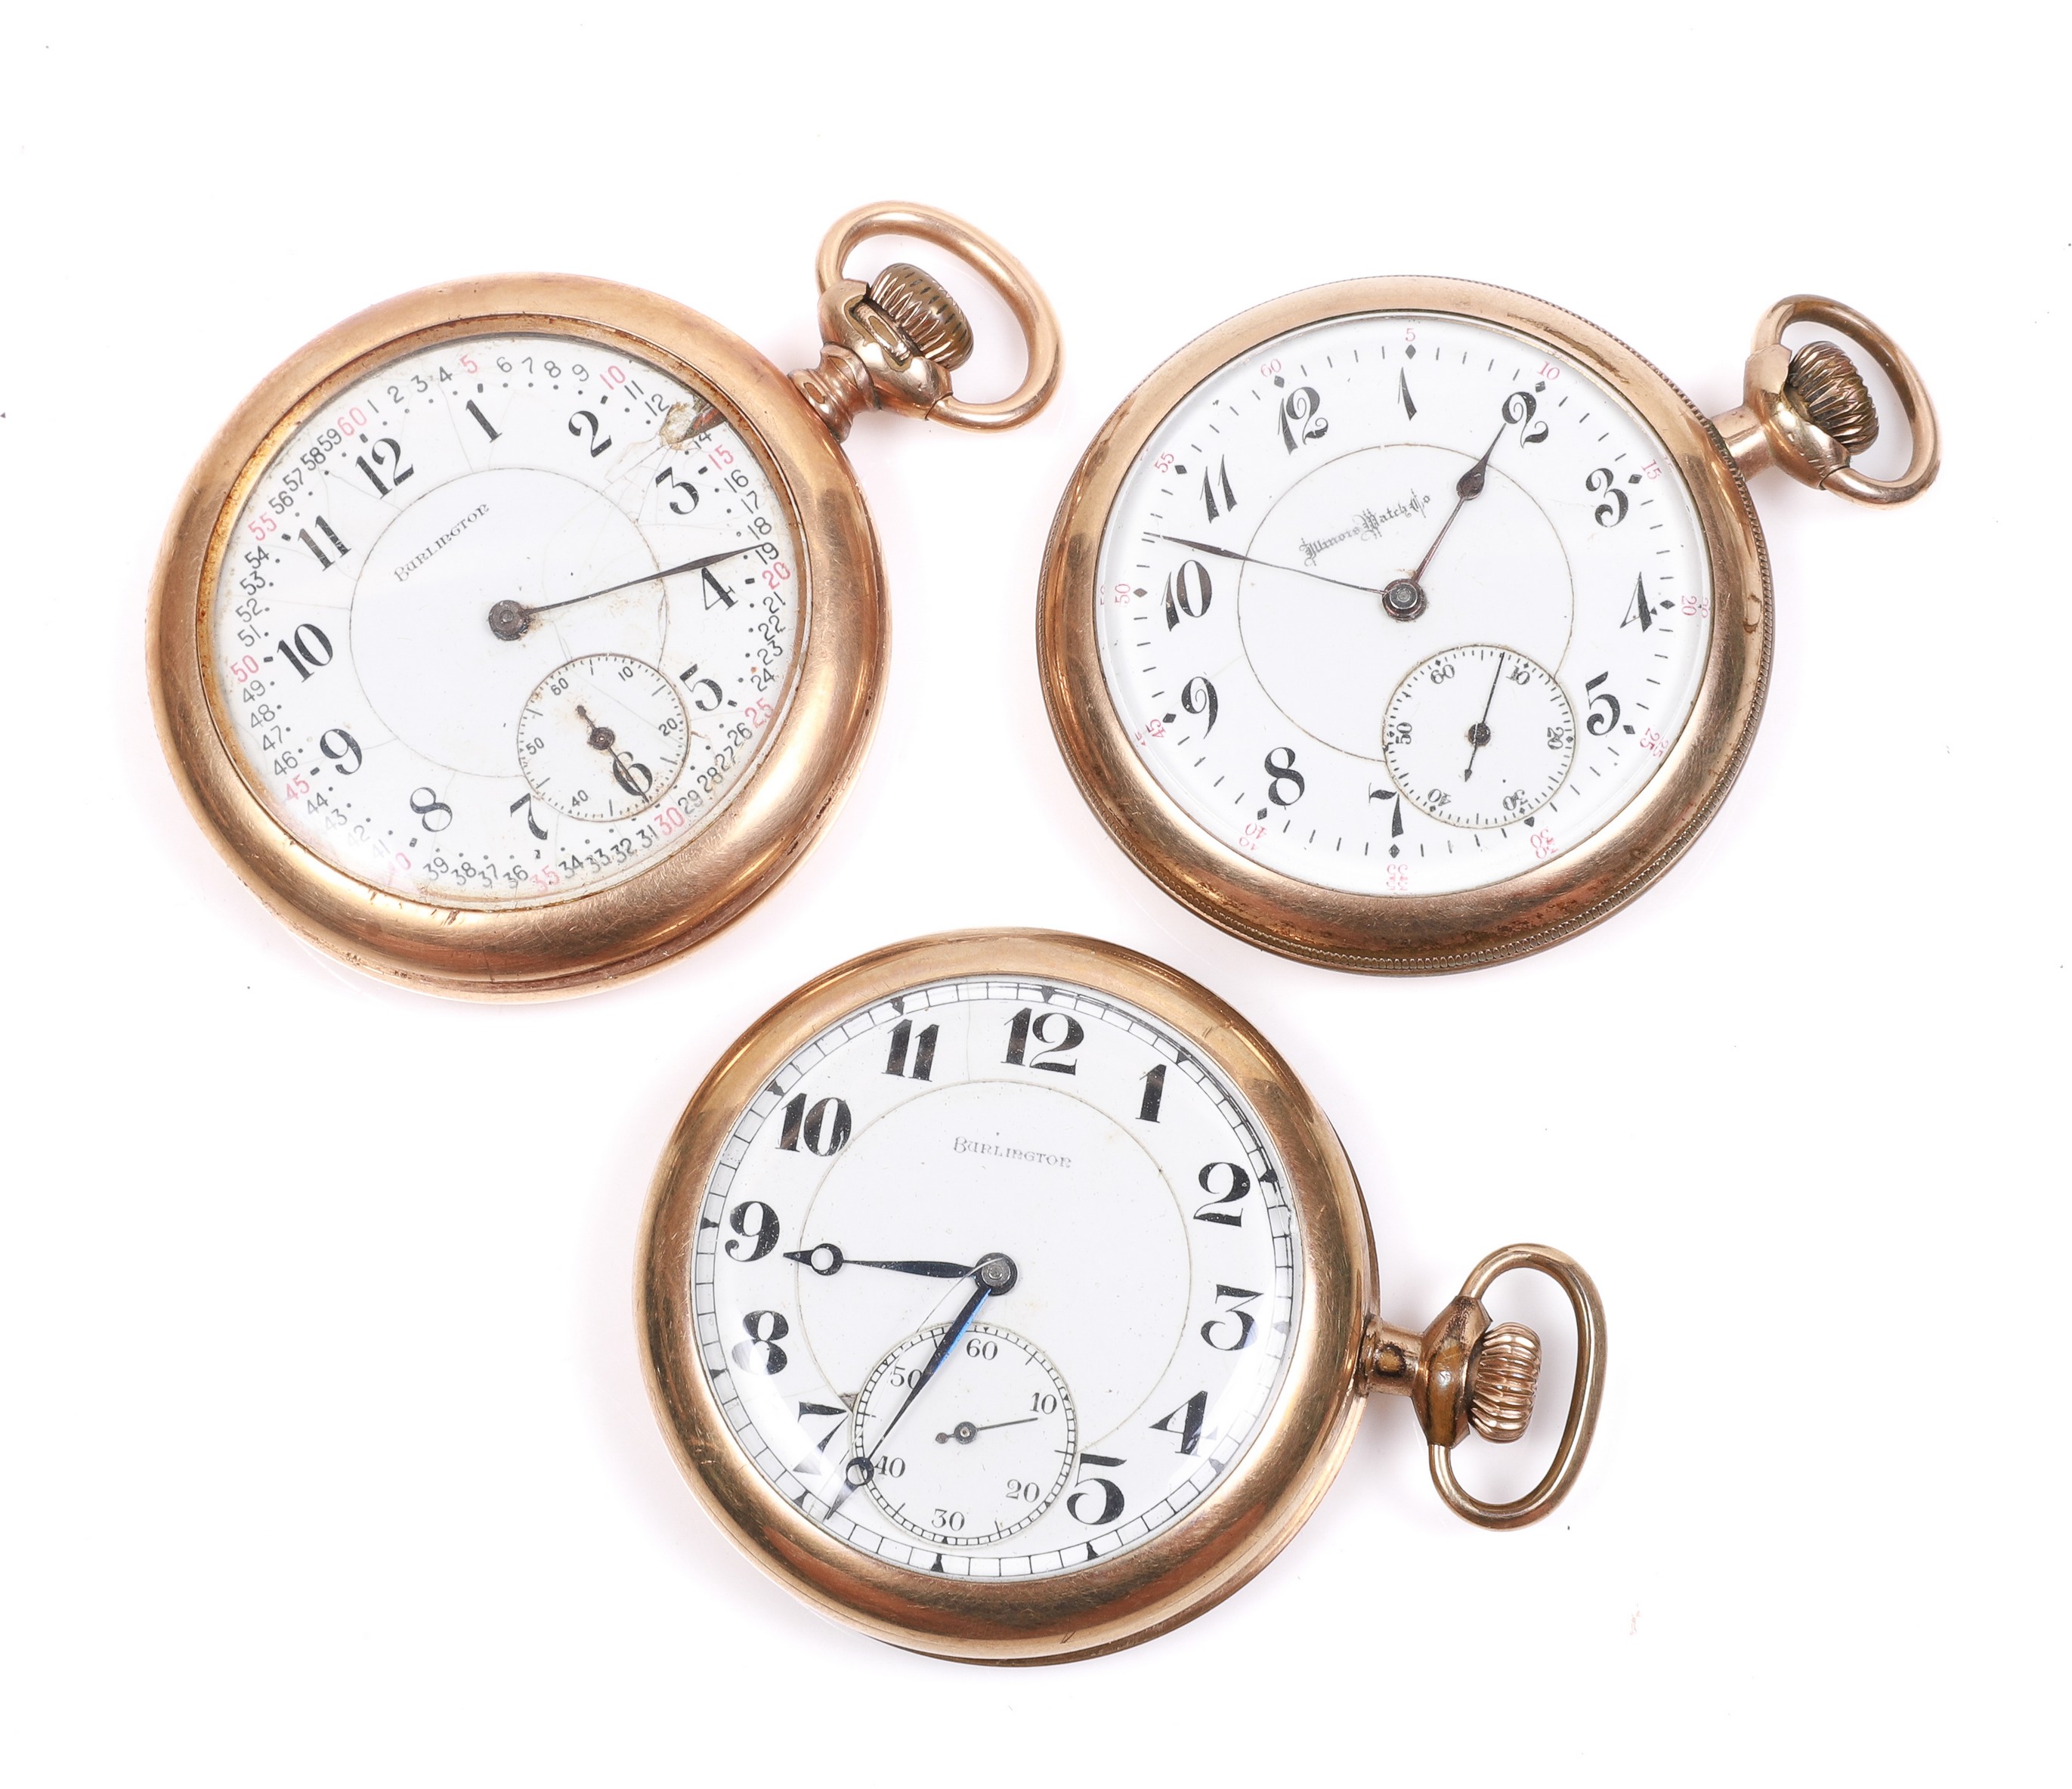  3 Gold filled pocket watches 3b4d54